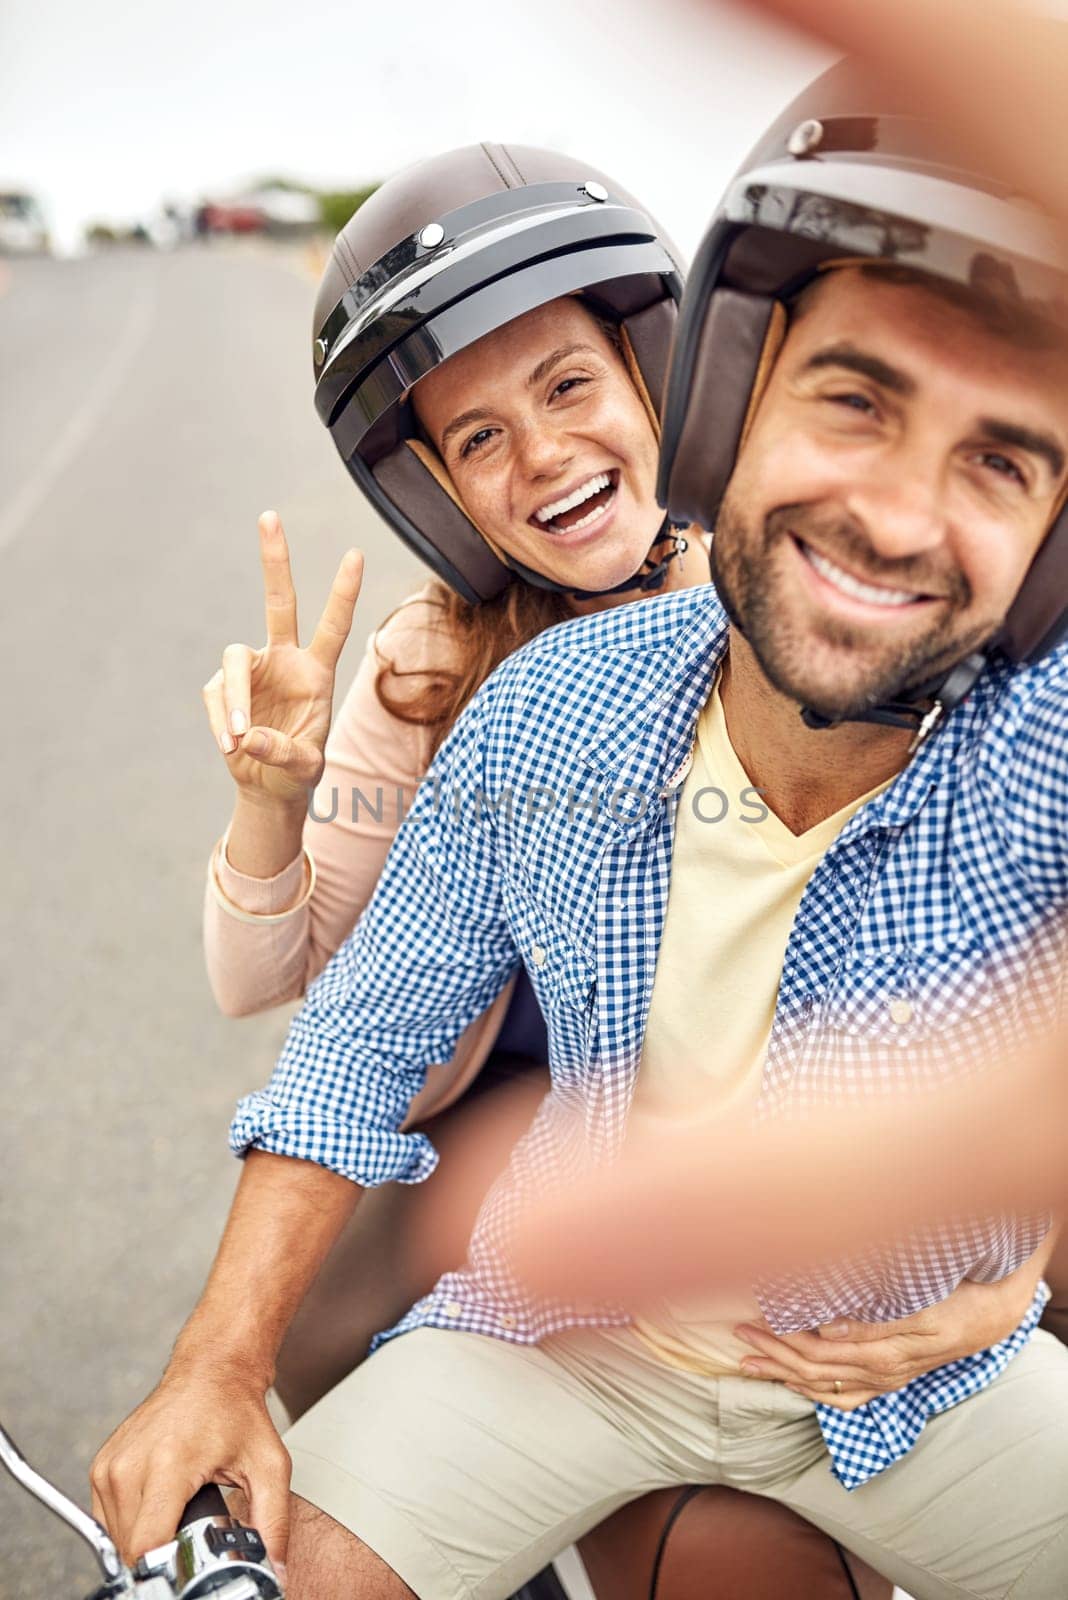 Couple, peace sign and smile in selfie, hand and road trip or vacation, scooter and embrace in portrait. Happy people, freedom and emoji or icon in outdoors, travel and face or tourism with helmet.